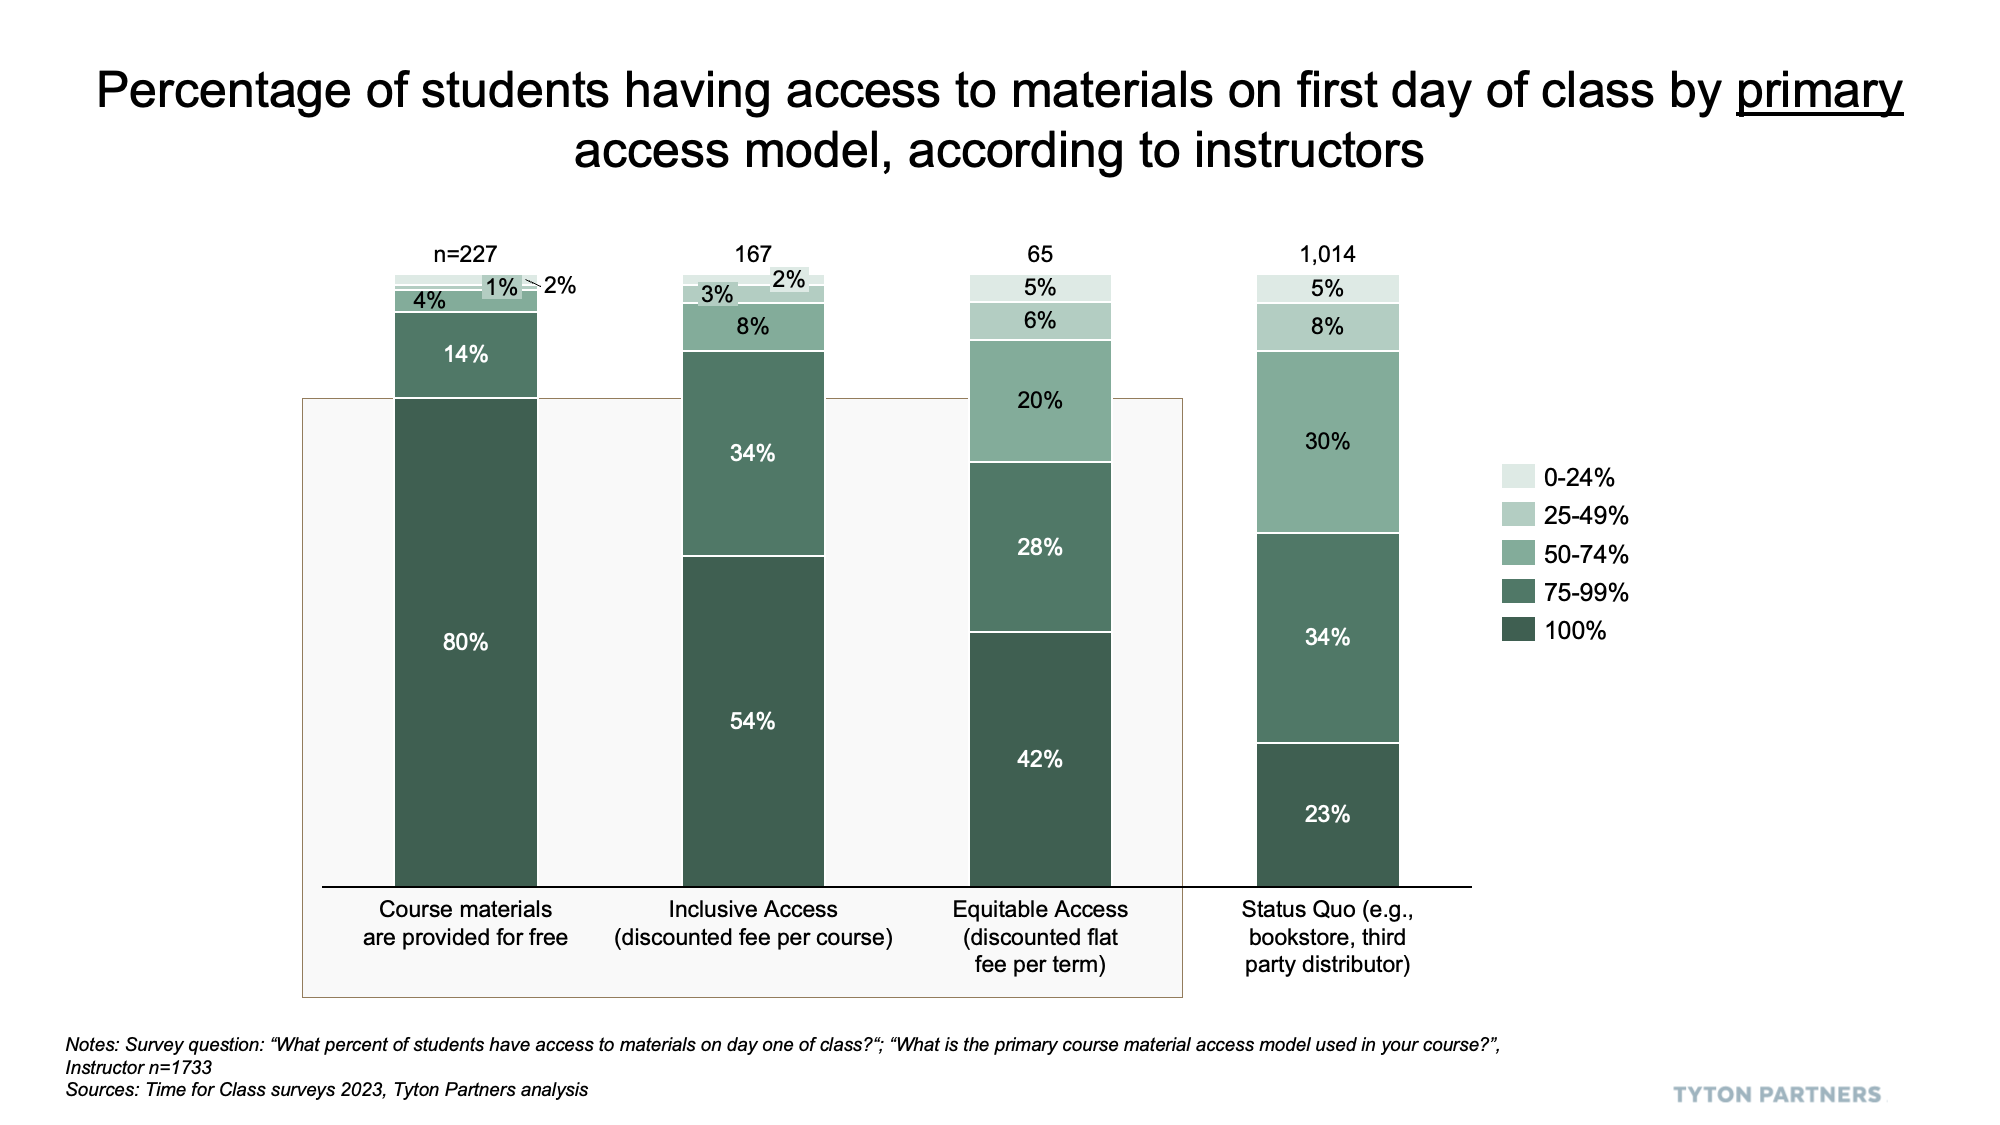 Tyton Partners: Percentage of students having access to materials on first day of class by primary access model, according to instructors